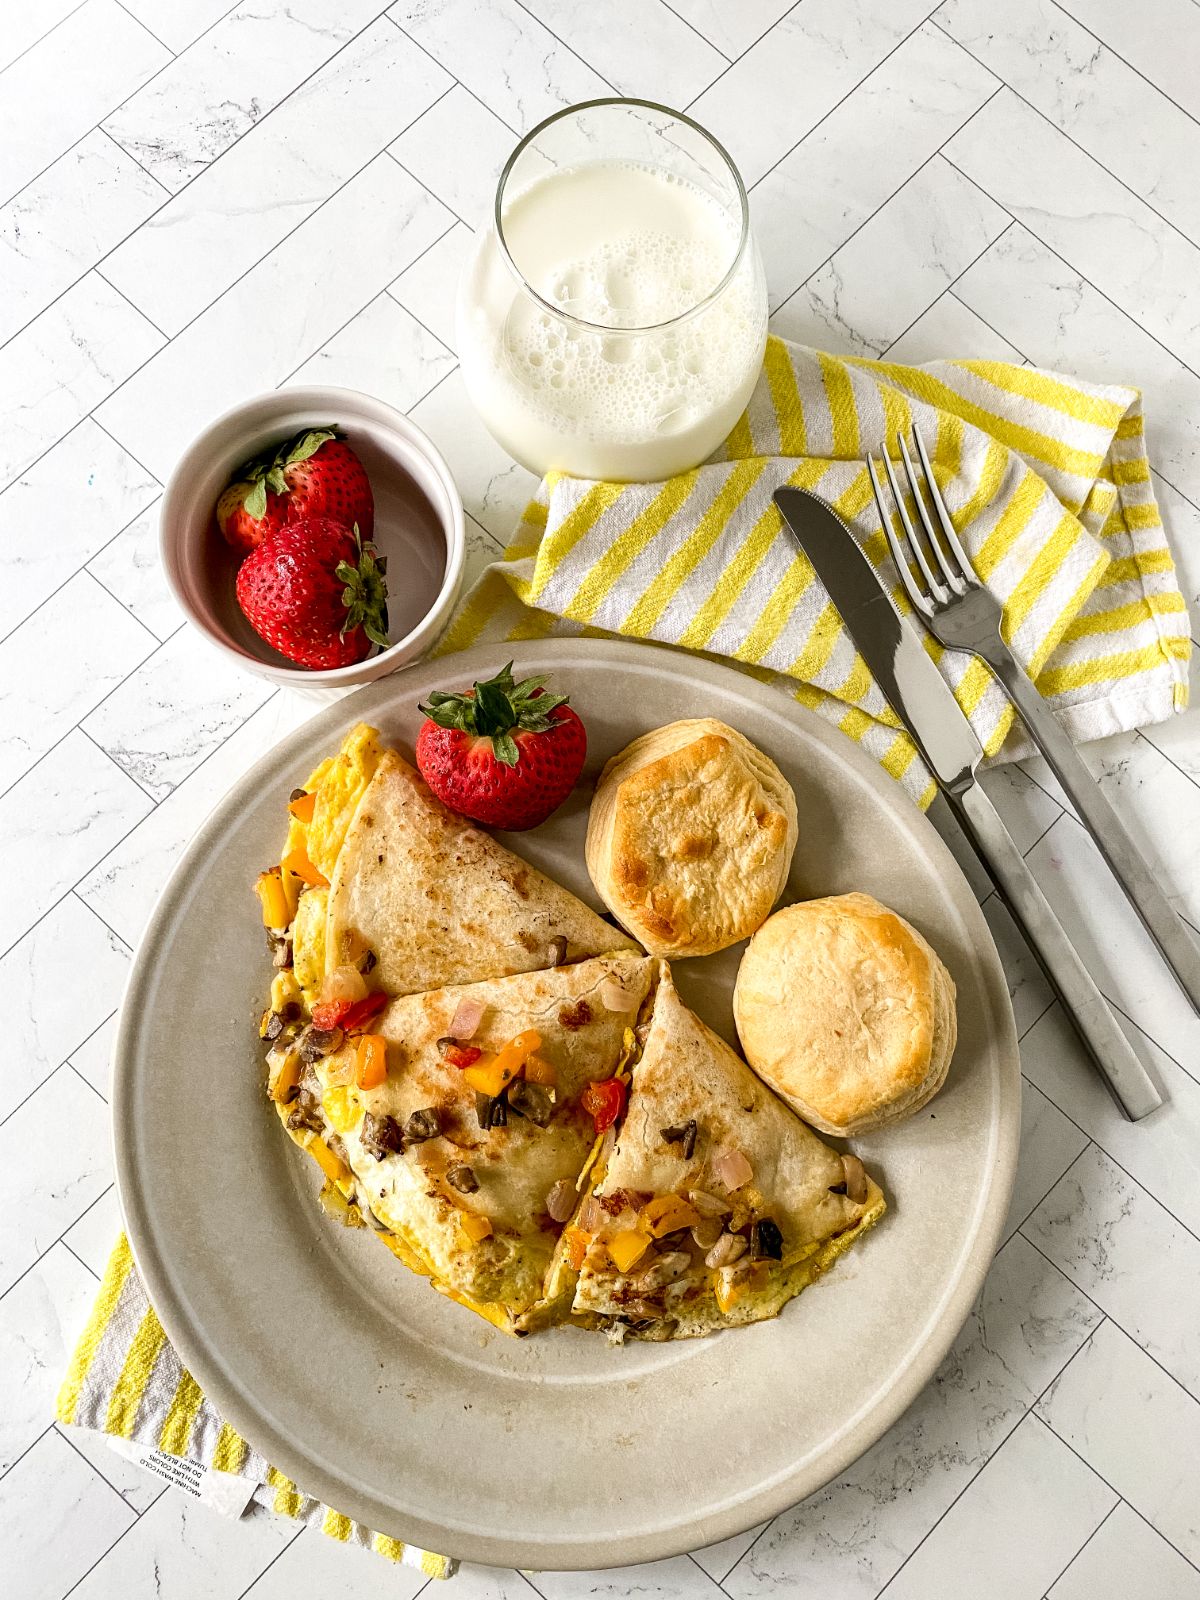 quesadilla on plate with biscuits and strawberries